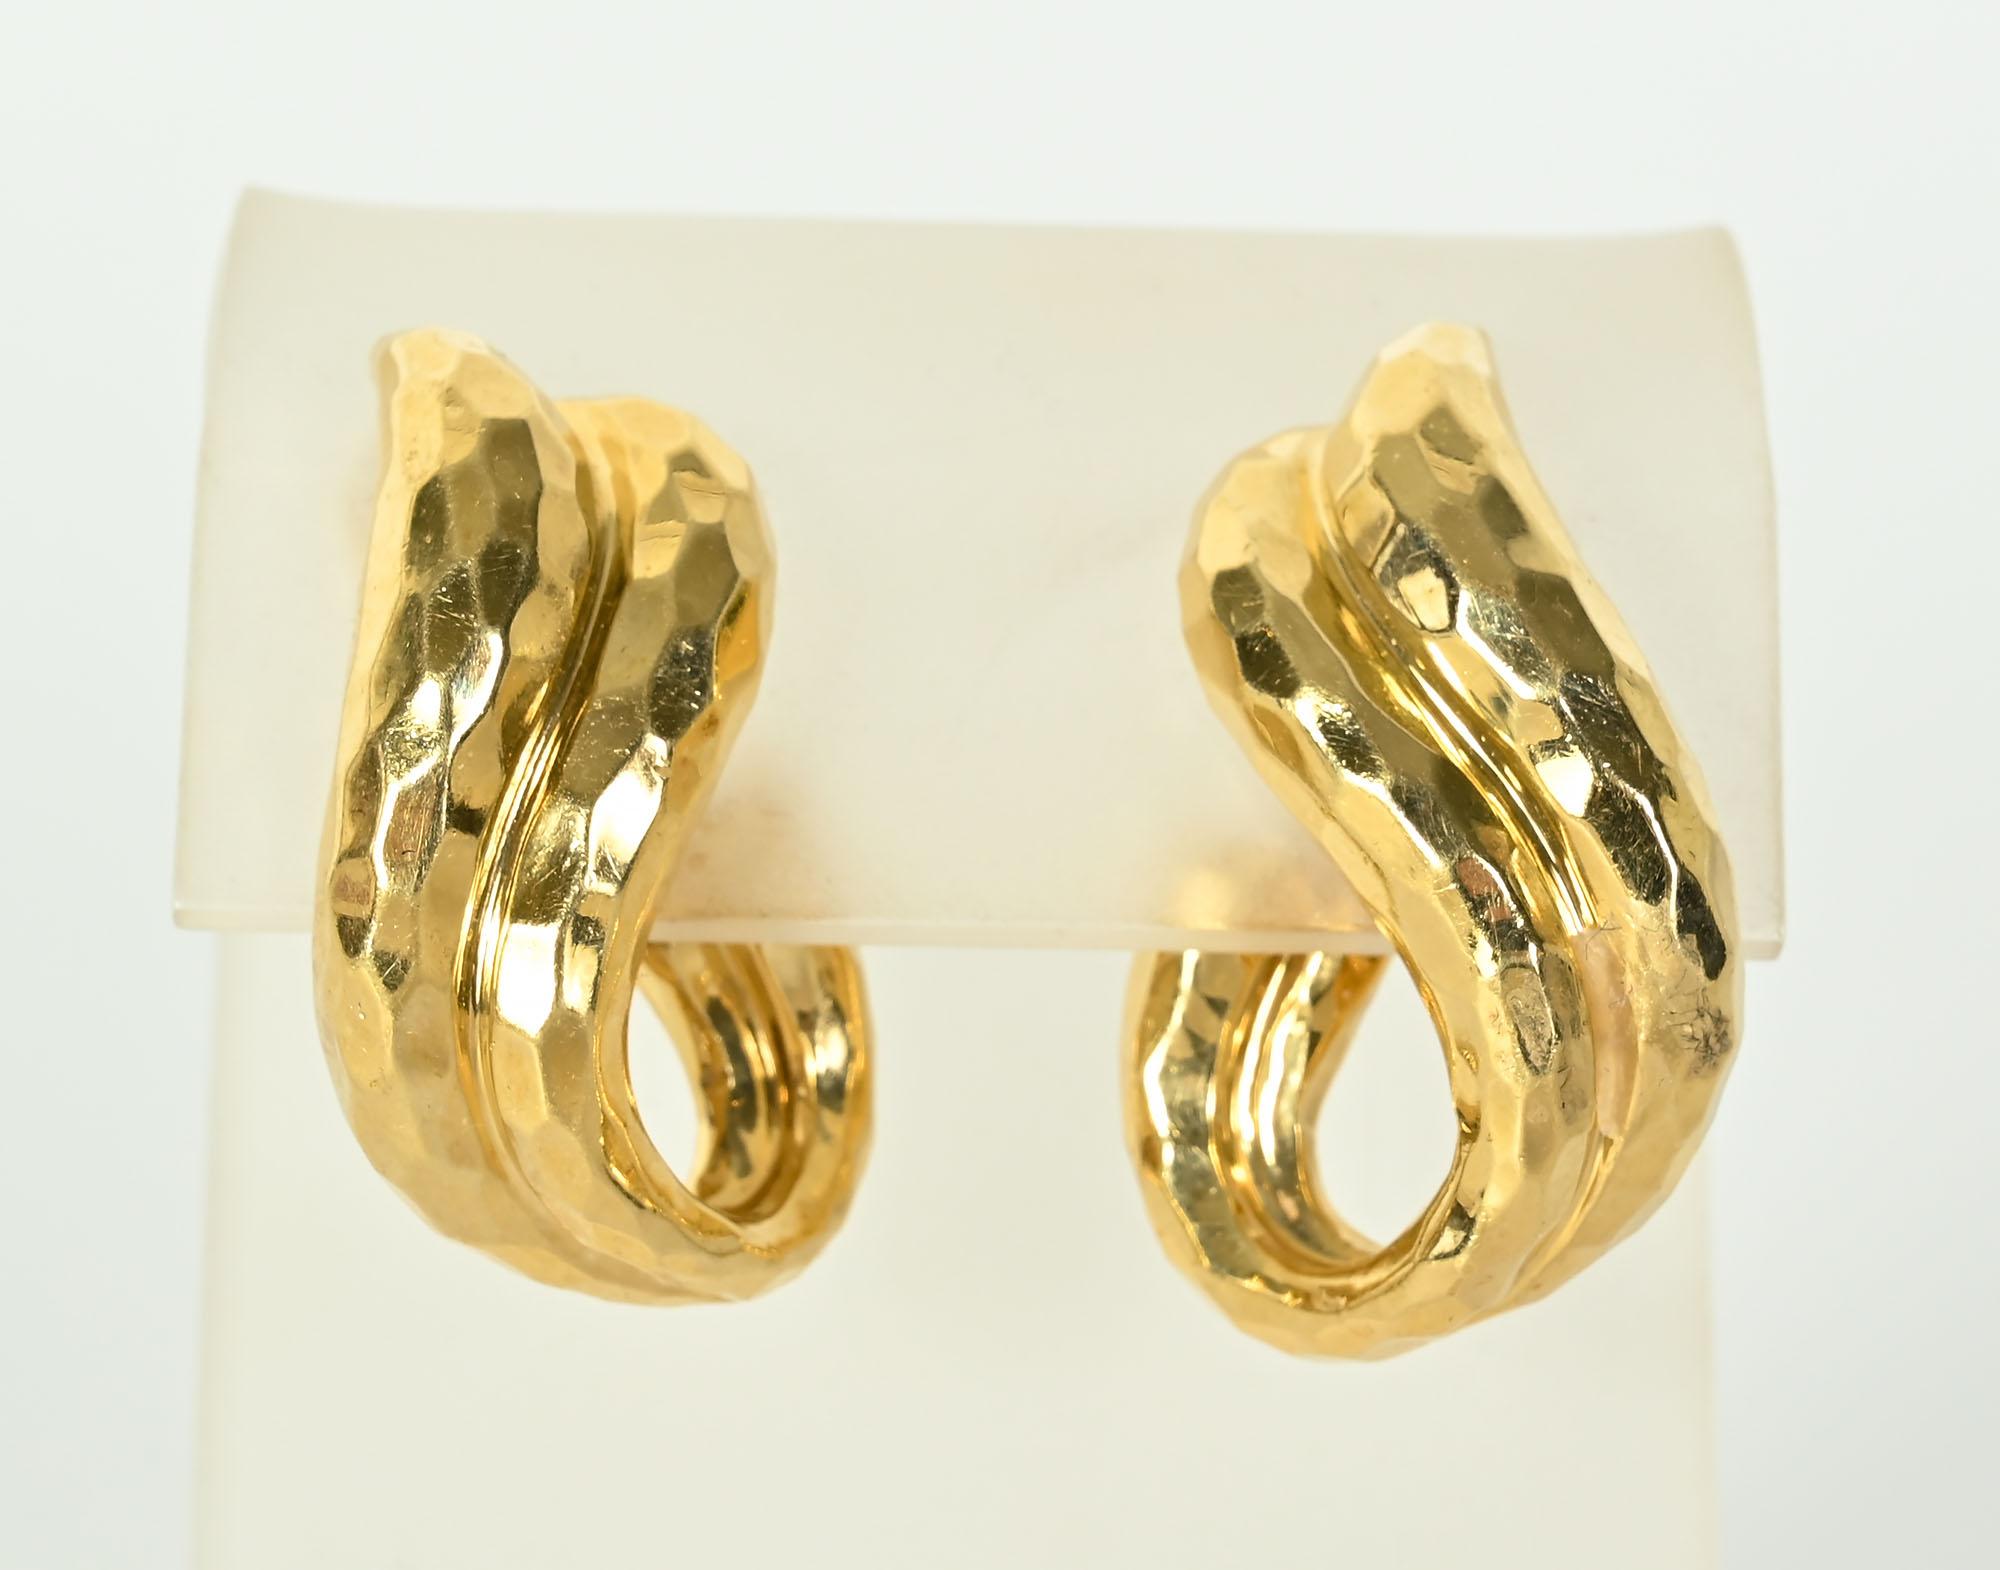 Large and graceful 18 karat hammered gold earrings by Henry Dunay. They have the hammered gold finish that he often used. The earrings have a lovely curvilinear design measuring 1 1/4 inches in length.
Clip backs can be converted to posts.